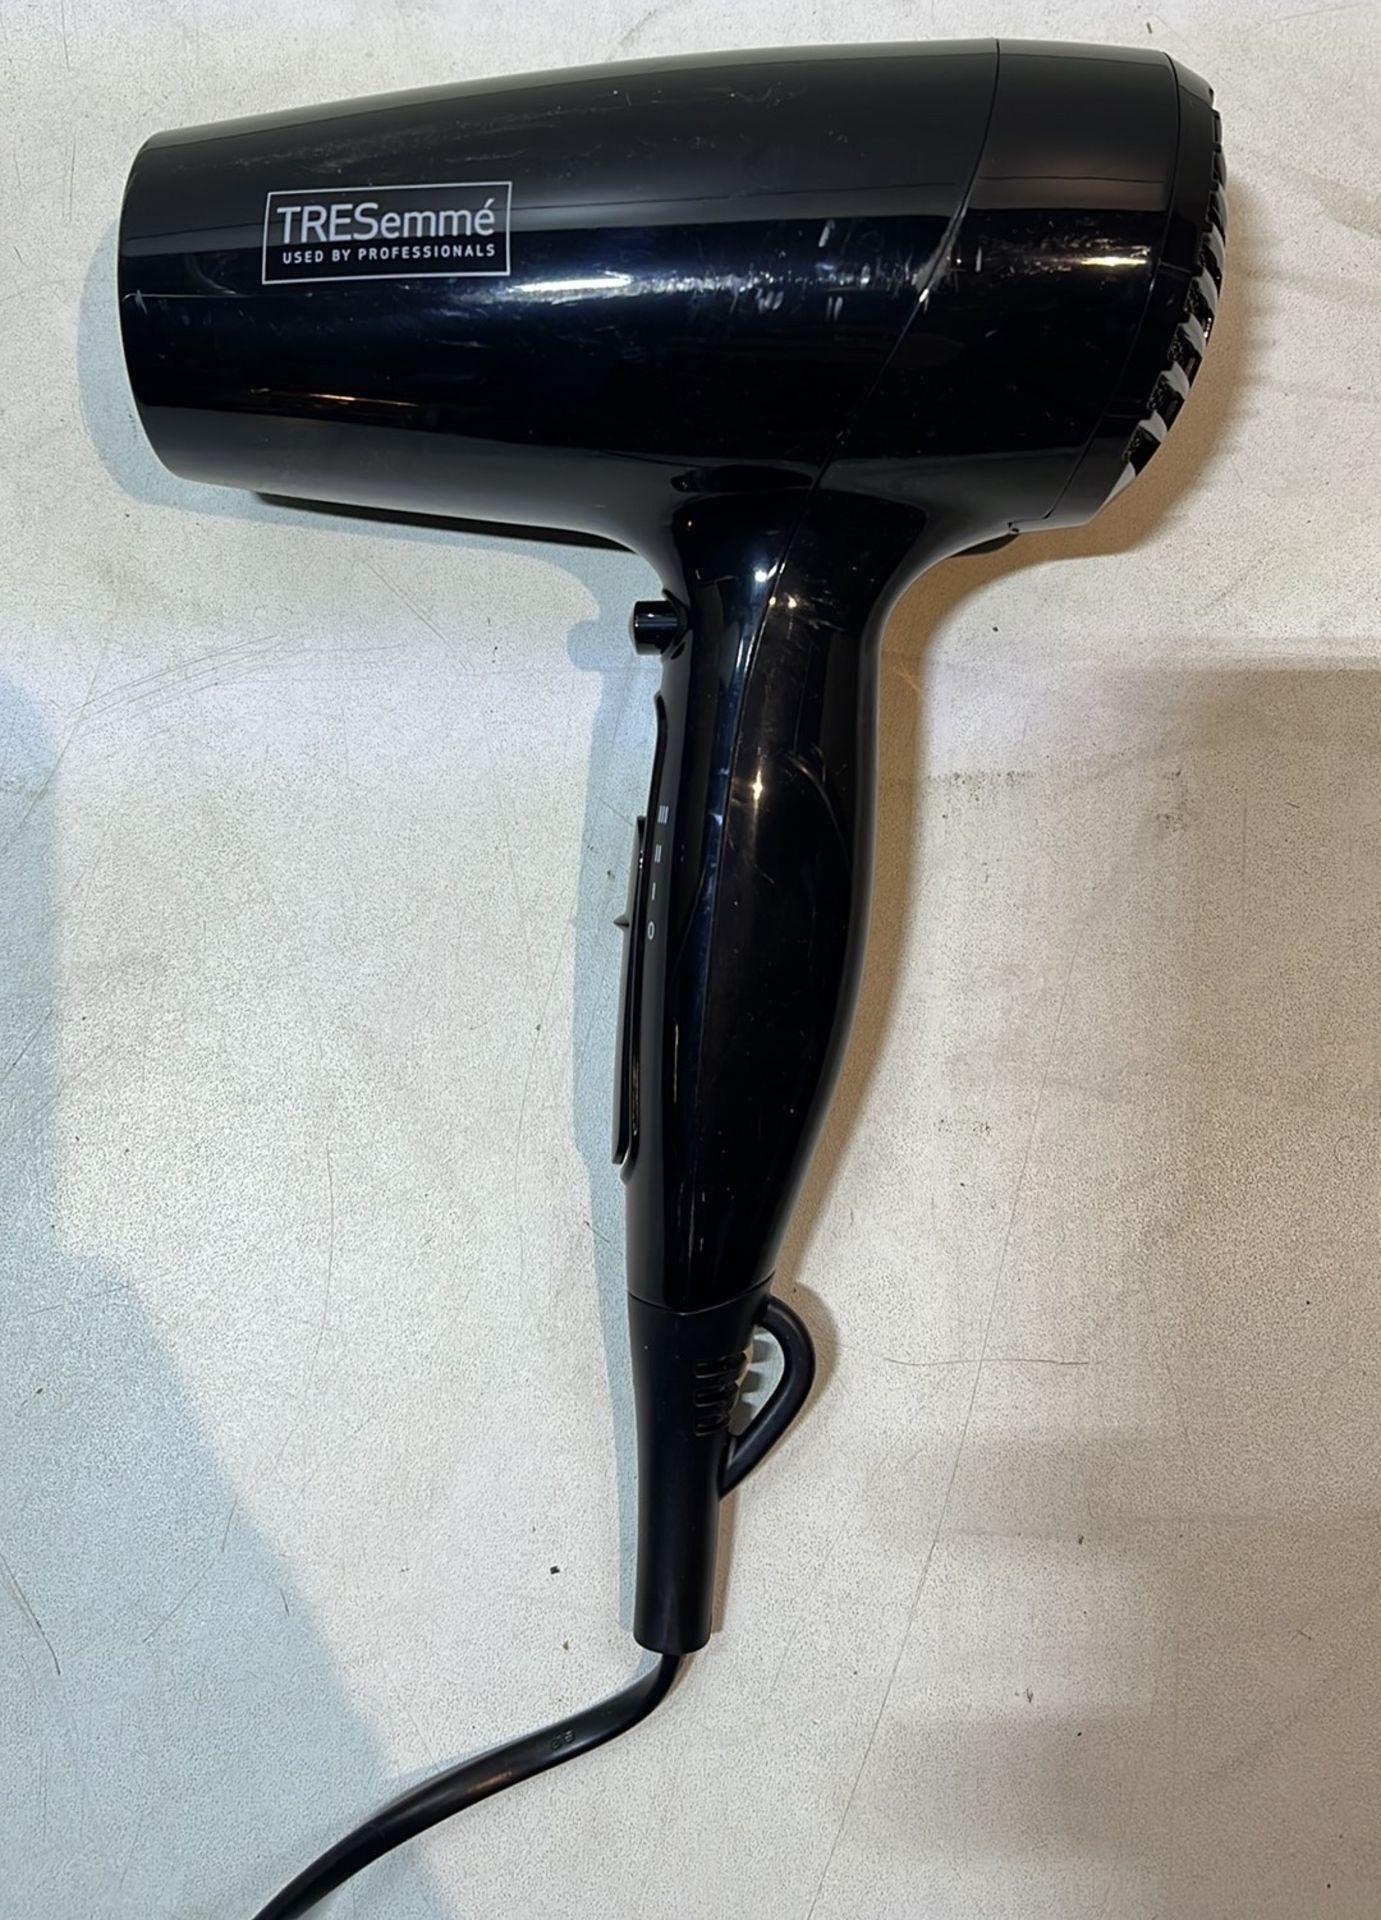 TRESemme S302A Hairdryer